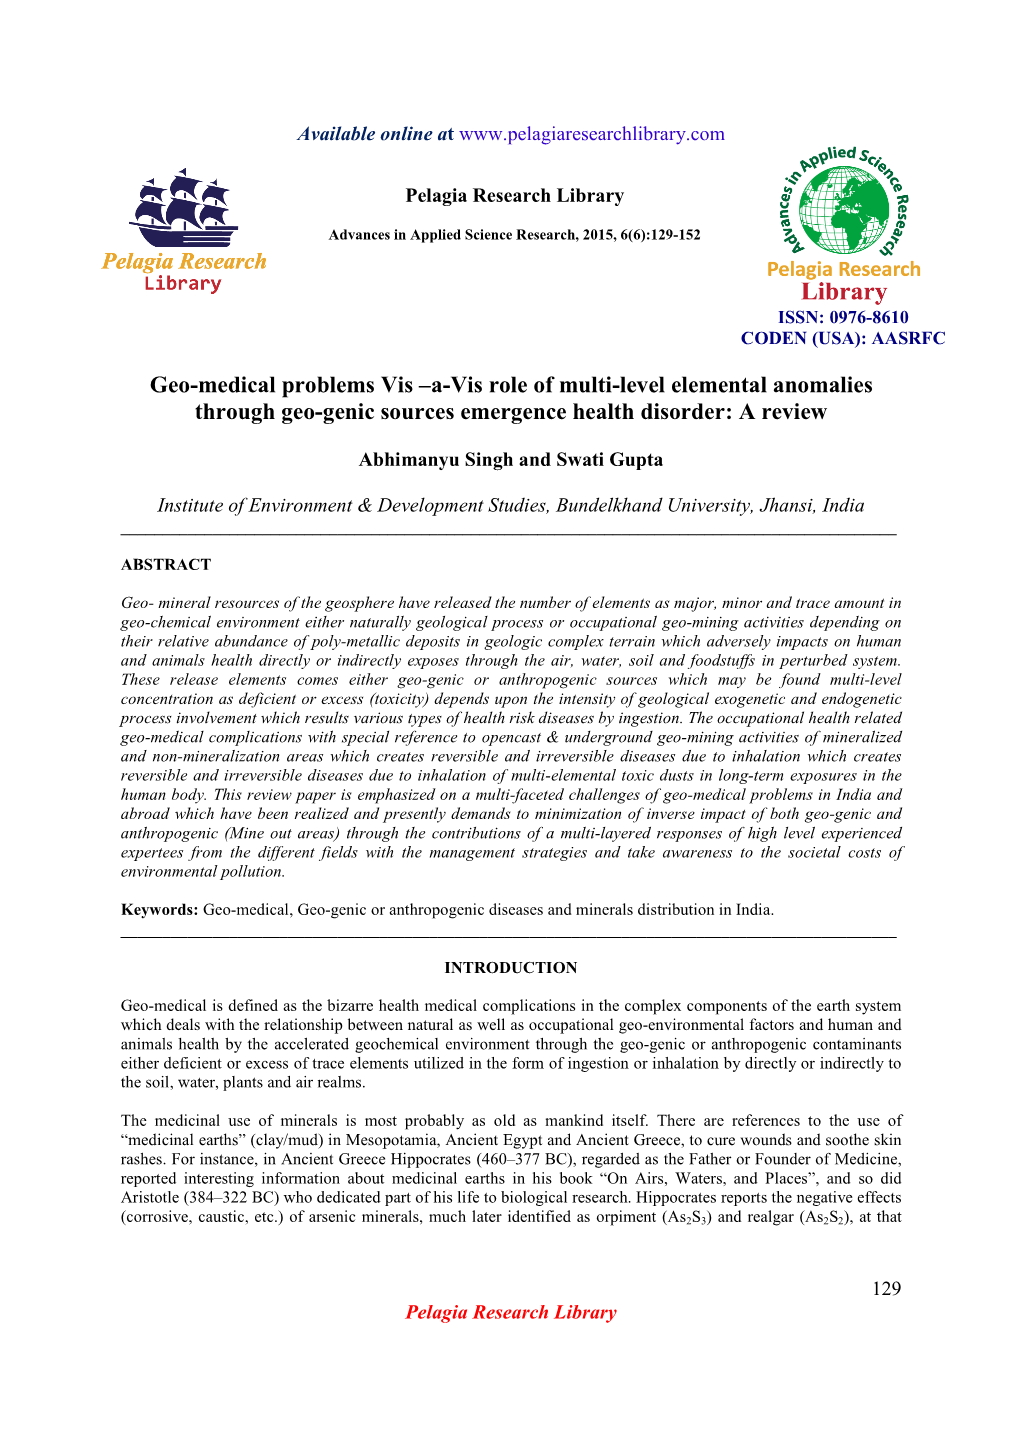 A-Vis Role of Multi-Level Elemental Anomalies Through Geo-Genic Sources Emergence Health Disorder: a Review